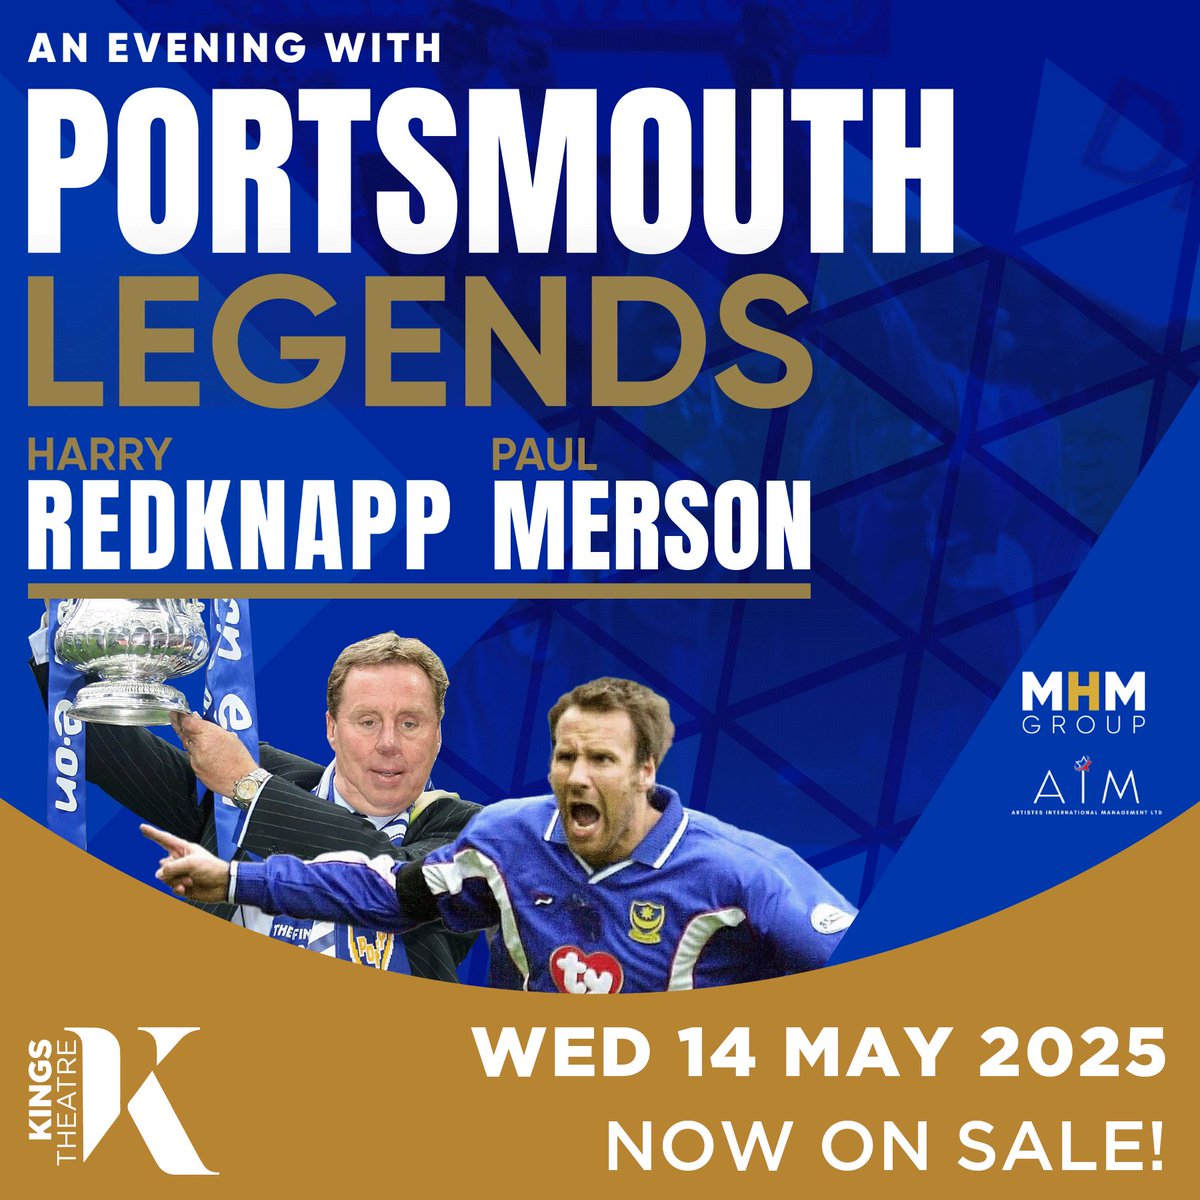 ✨NEW SHOW ON SALE!✨ An Evening with Portsmouth Legends comes to The Kings in 2025 starring Harry Redknapp and Paul Merson! They will give an insight into the history of the club and its iconic players! ⚽ 📅 Wed 14 May 2025 🎟️ Tickets ➡️ buff.ly/3Qoe0Ut